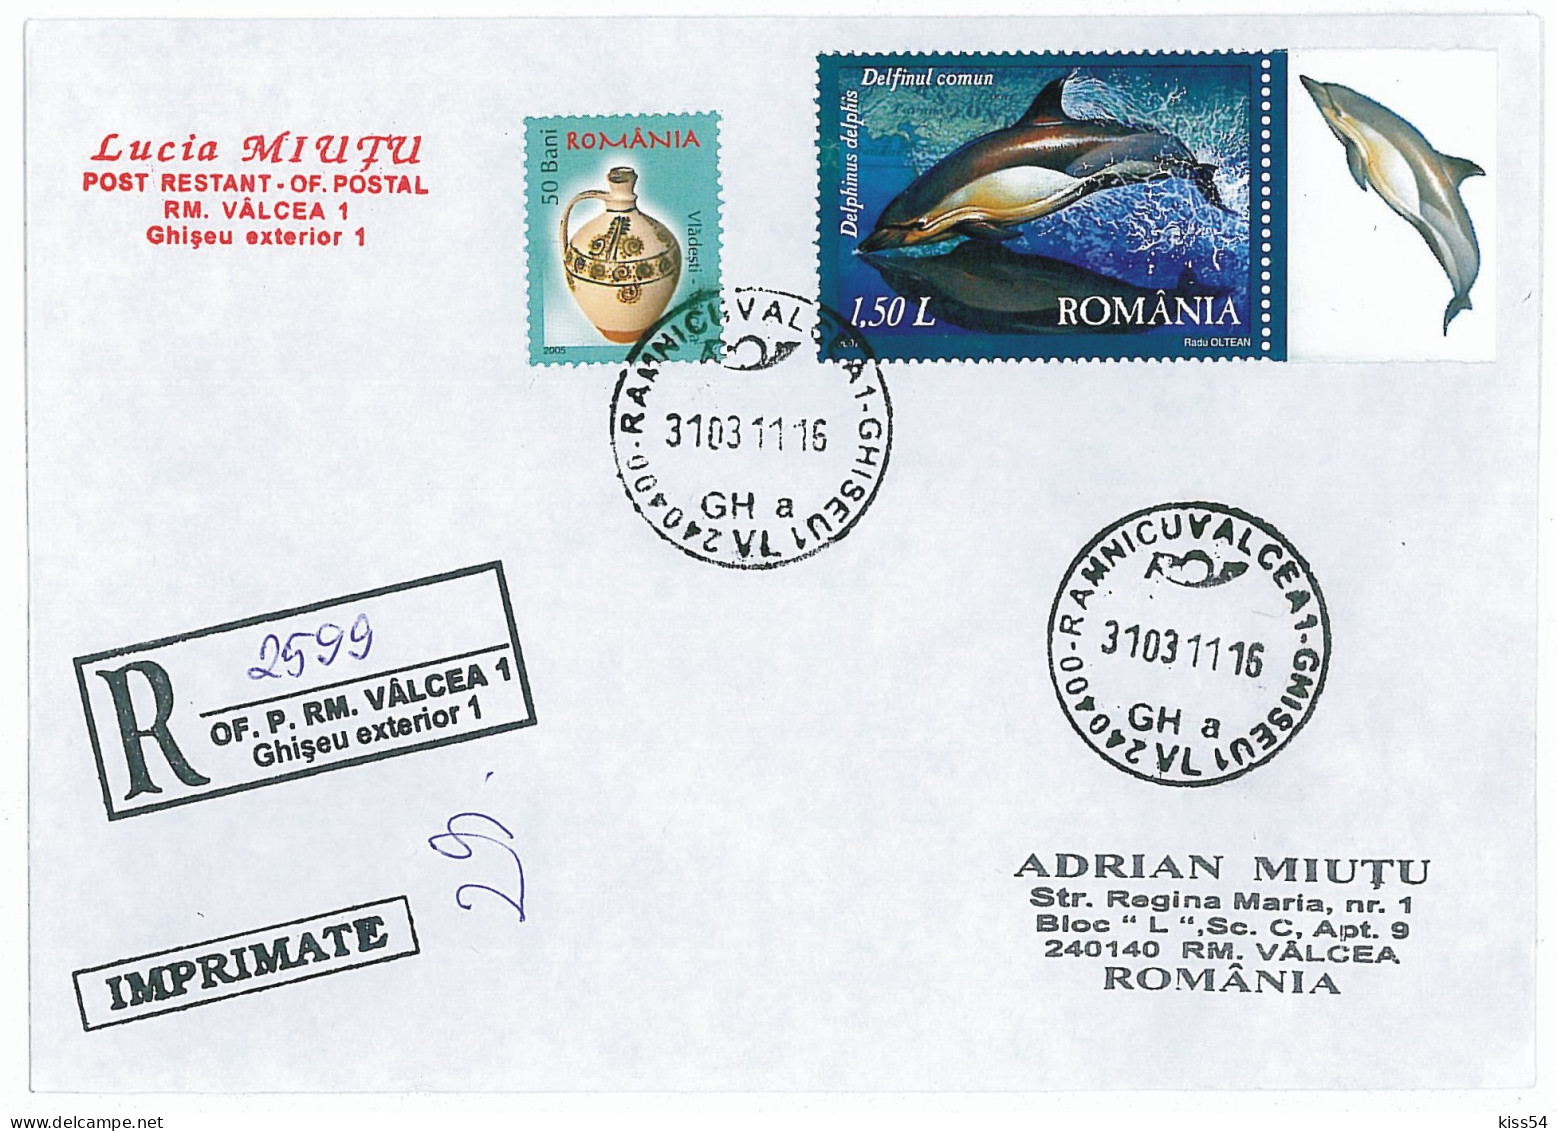 NCP 14 - 2599-a DOLPHIN, Delphinus Delphis, Romania - Registered, Stamps With TABS - 2011 - Dolphins